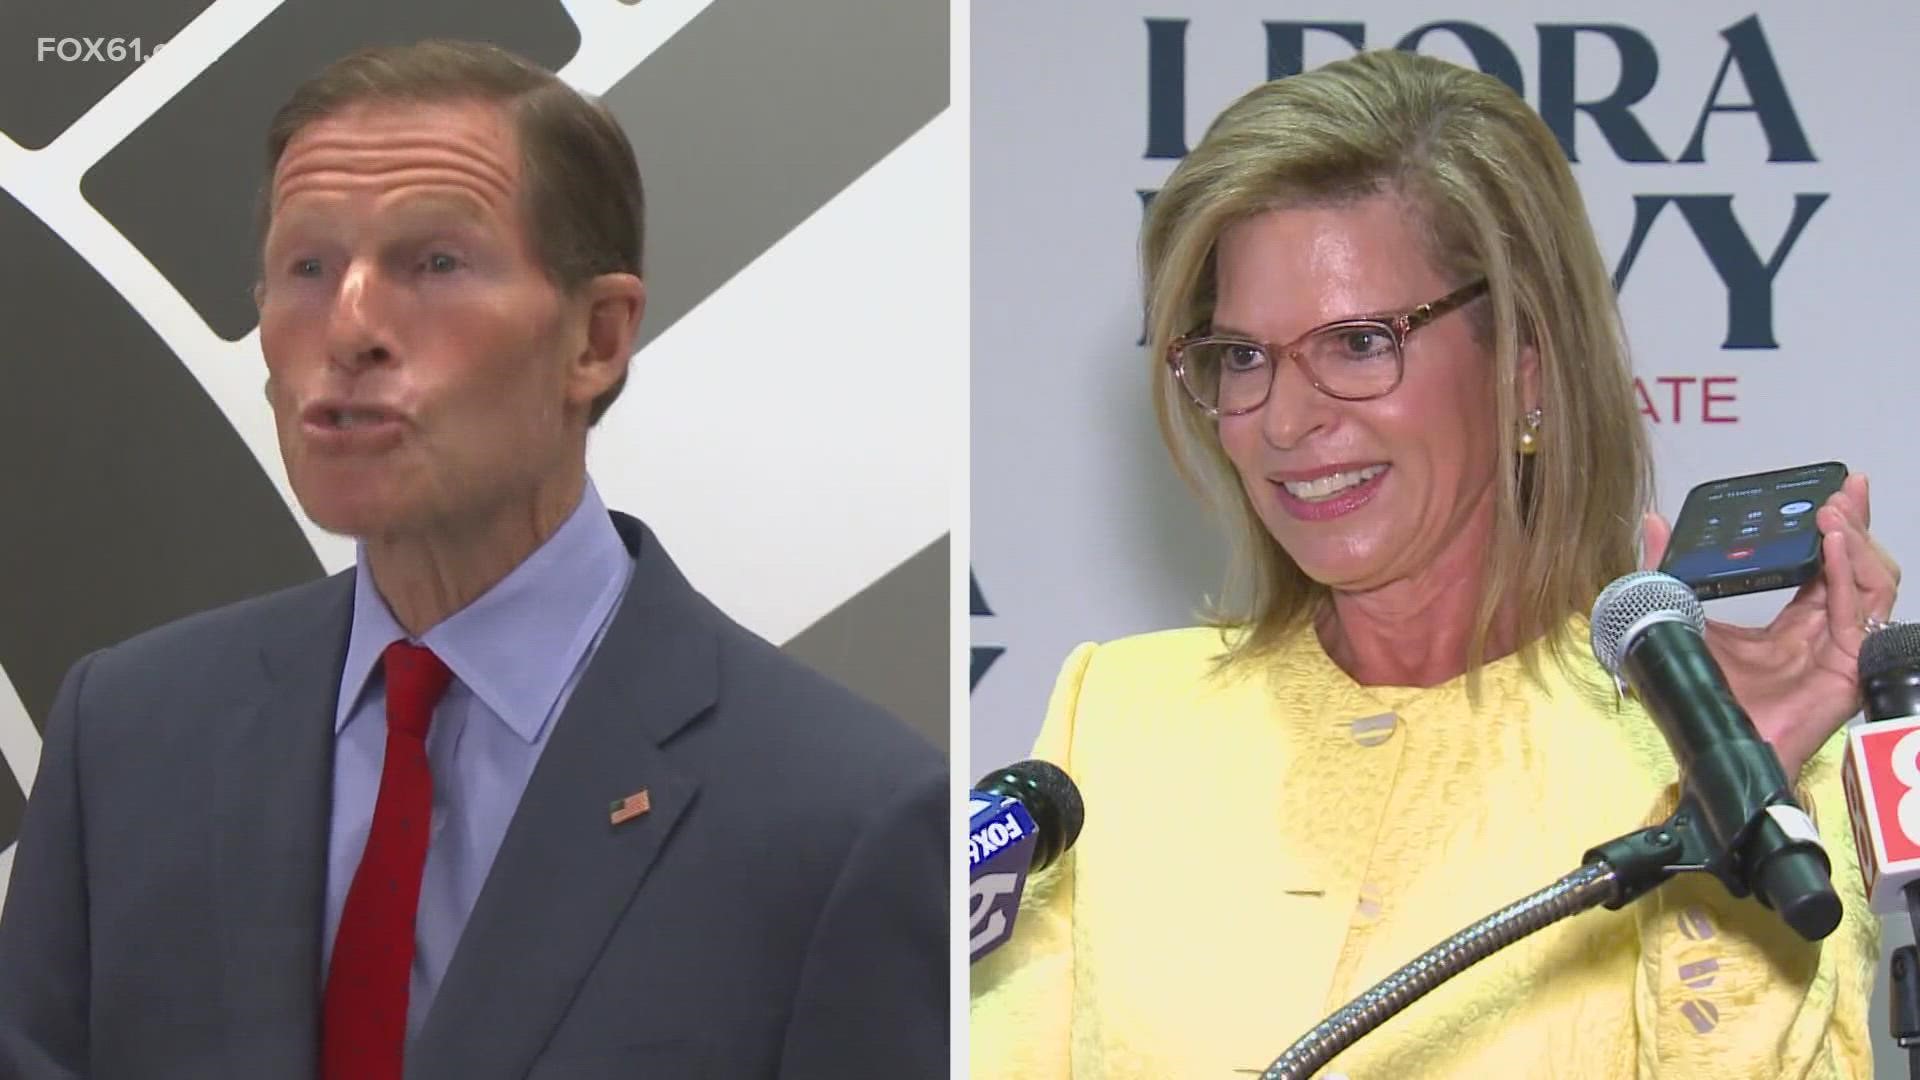 Sen. Richard Blumenthal (D) and GOP challenger Leora Levy took the stage for a final debate before voters decide who will represent Connecticut in the U.S. Senate.